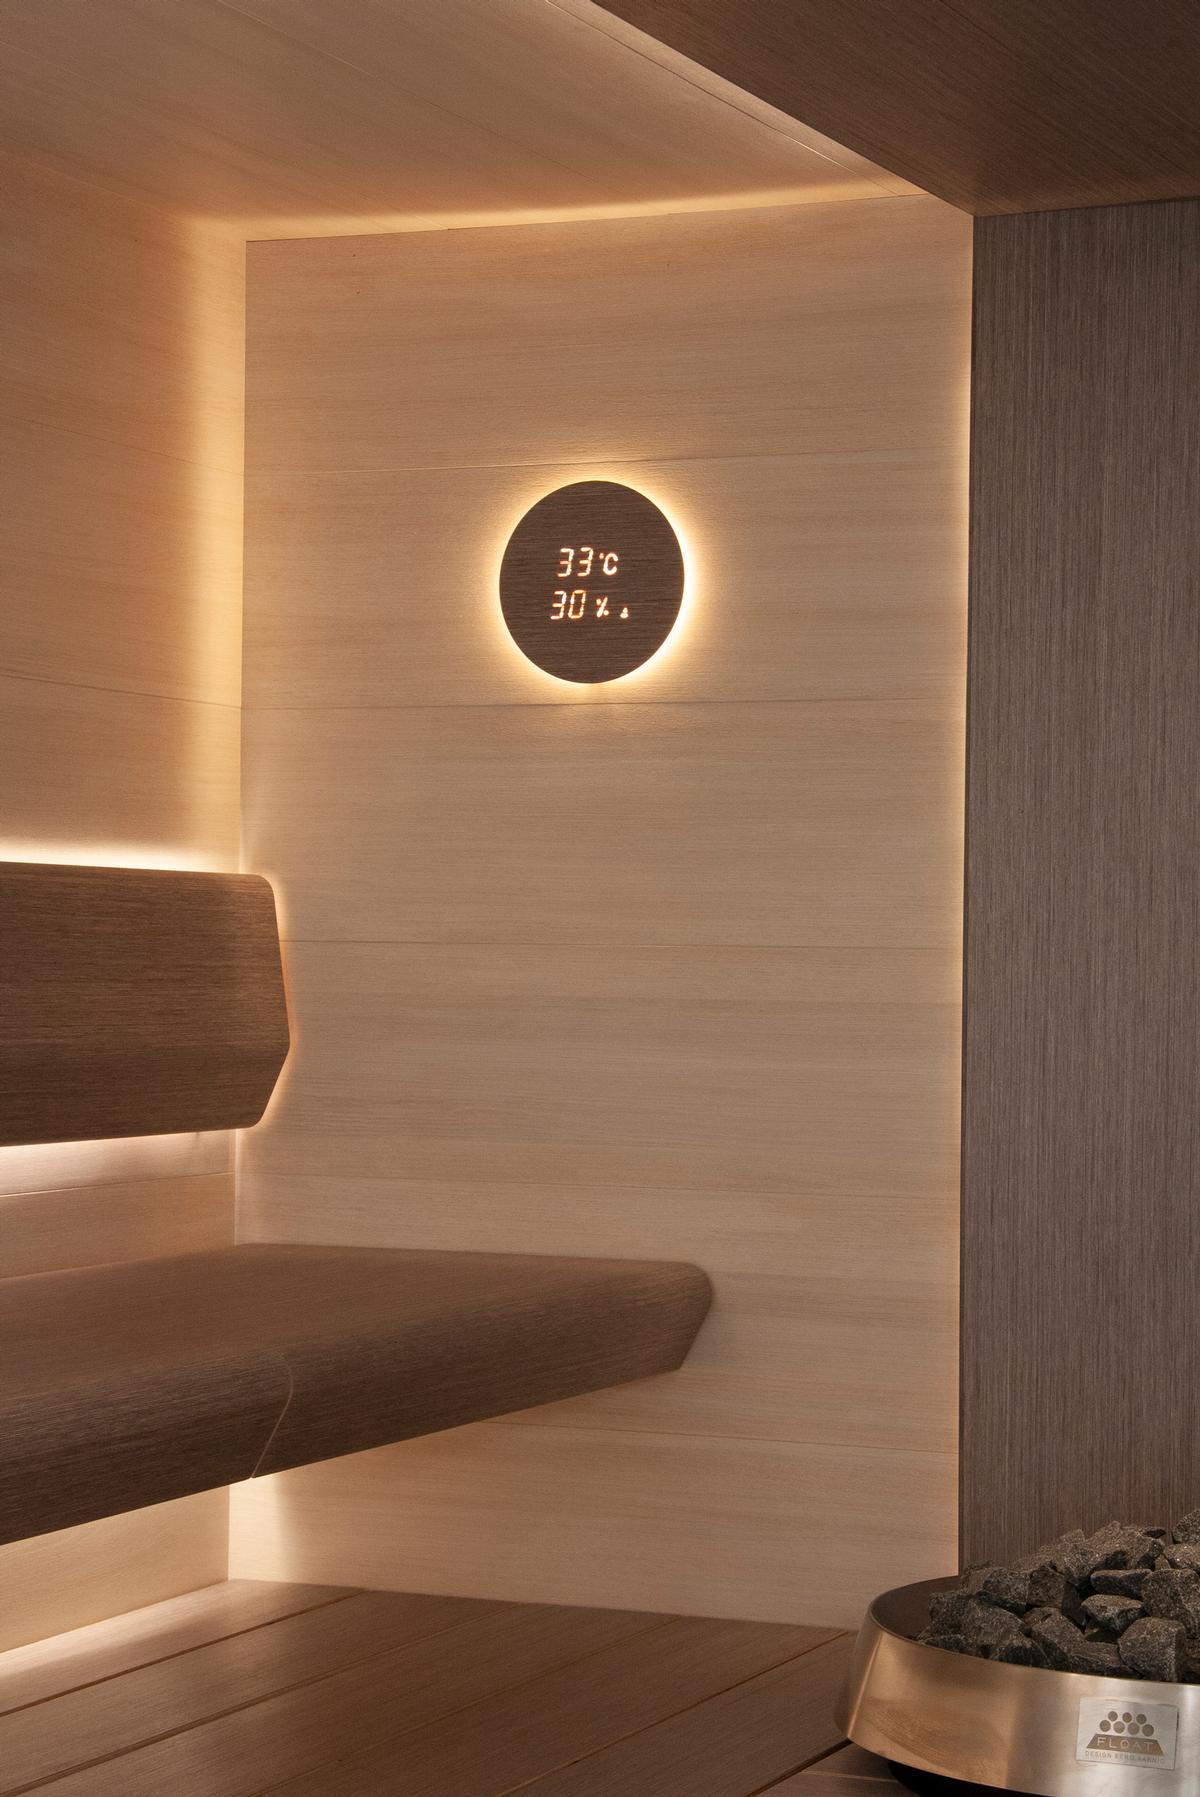 Aspectu has been designed to integrate seamlessly into saunas with a sleek discrete design